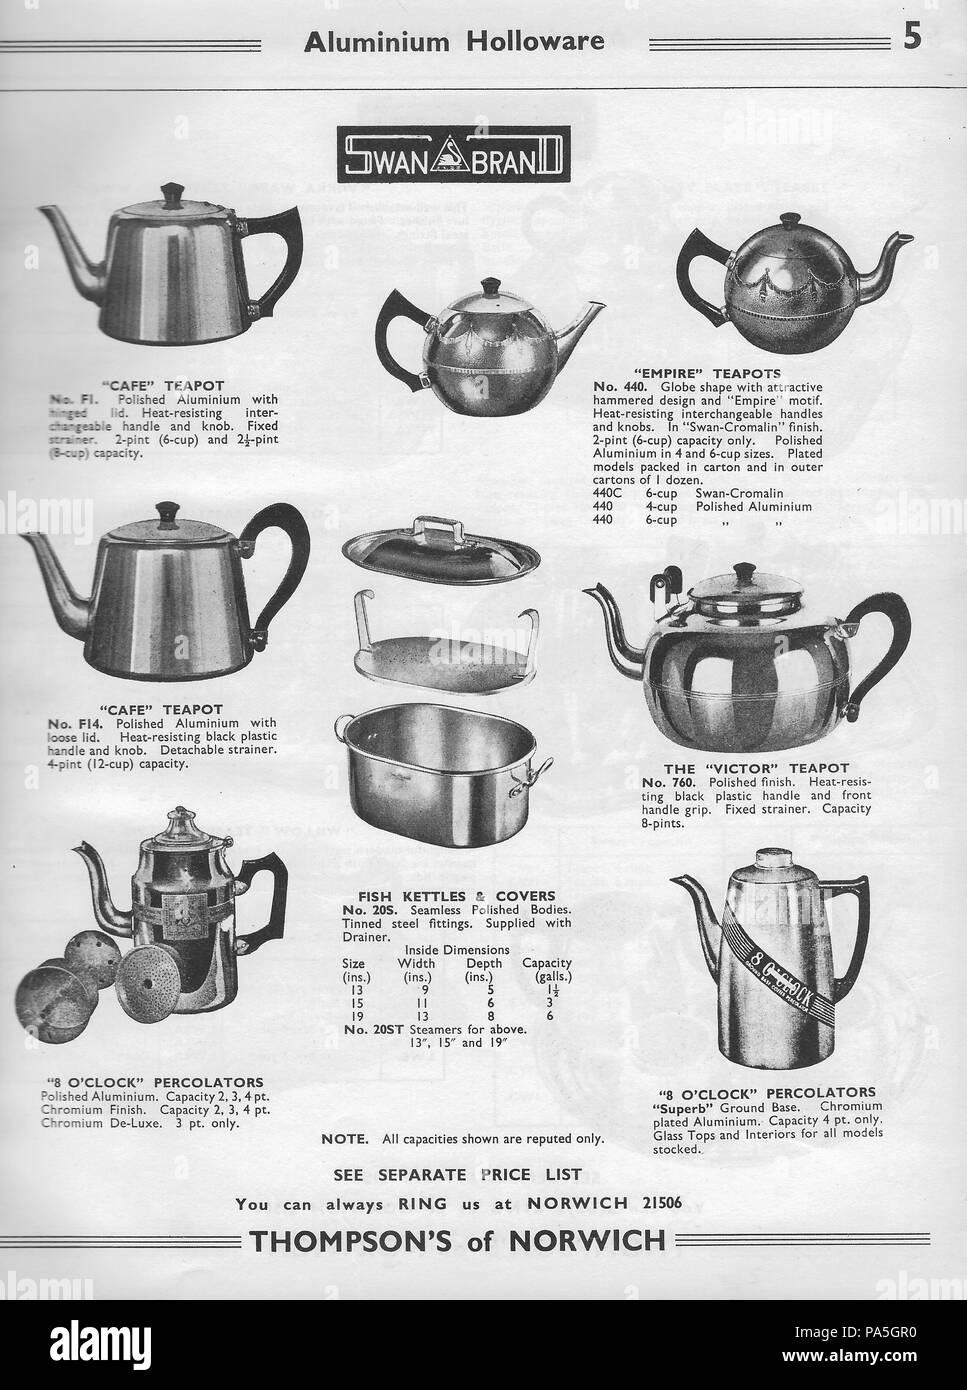 https://c8.alamy.com/comp/PA5GR0/general-wholesale-catalogue-hardware-factors-h-thompson-sons-ltd-chalk-hill-works-norwich-england-uk-1940s-1950s-retro-vintage-household-products-items-illustrated-pictures-drawings-illustrations-monochrome-black-and-white-PA5GR0.jpg